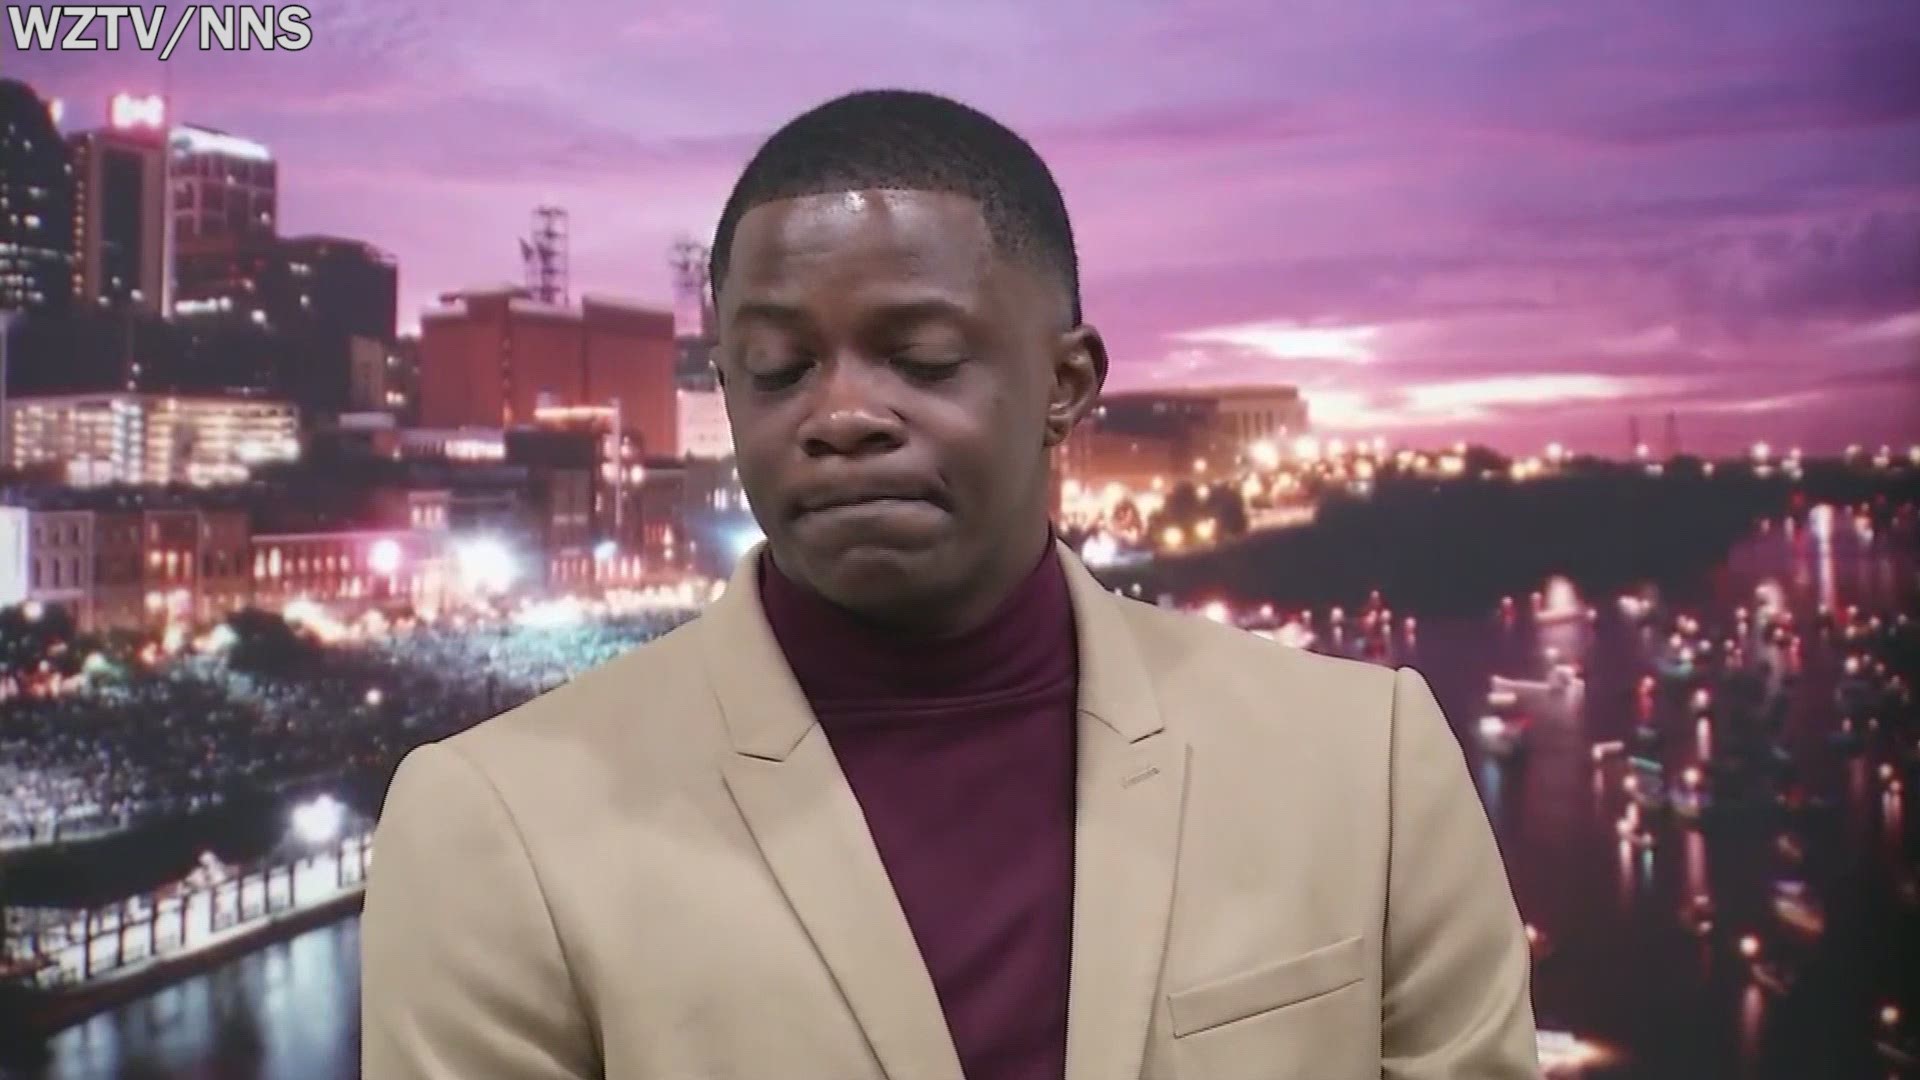 Waffle House Hero James Shaw: 'I'm Just a Regular Person'